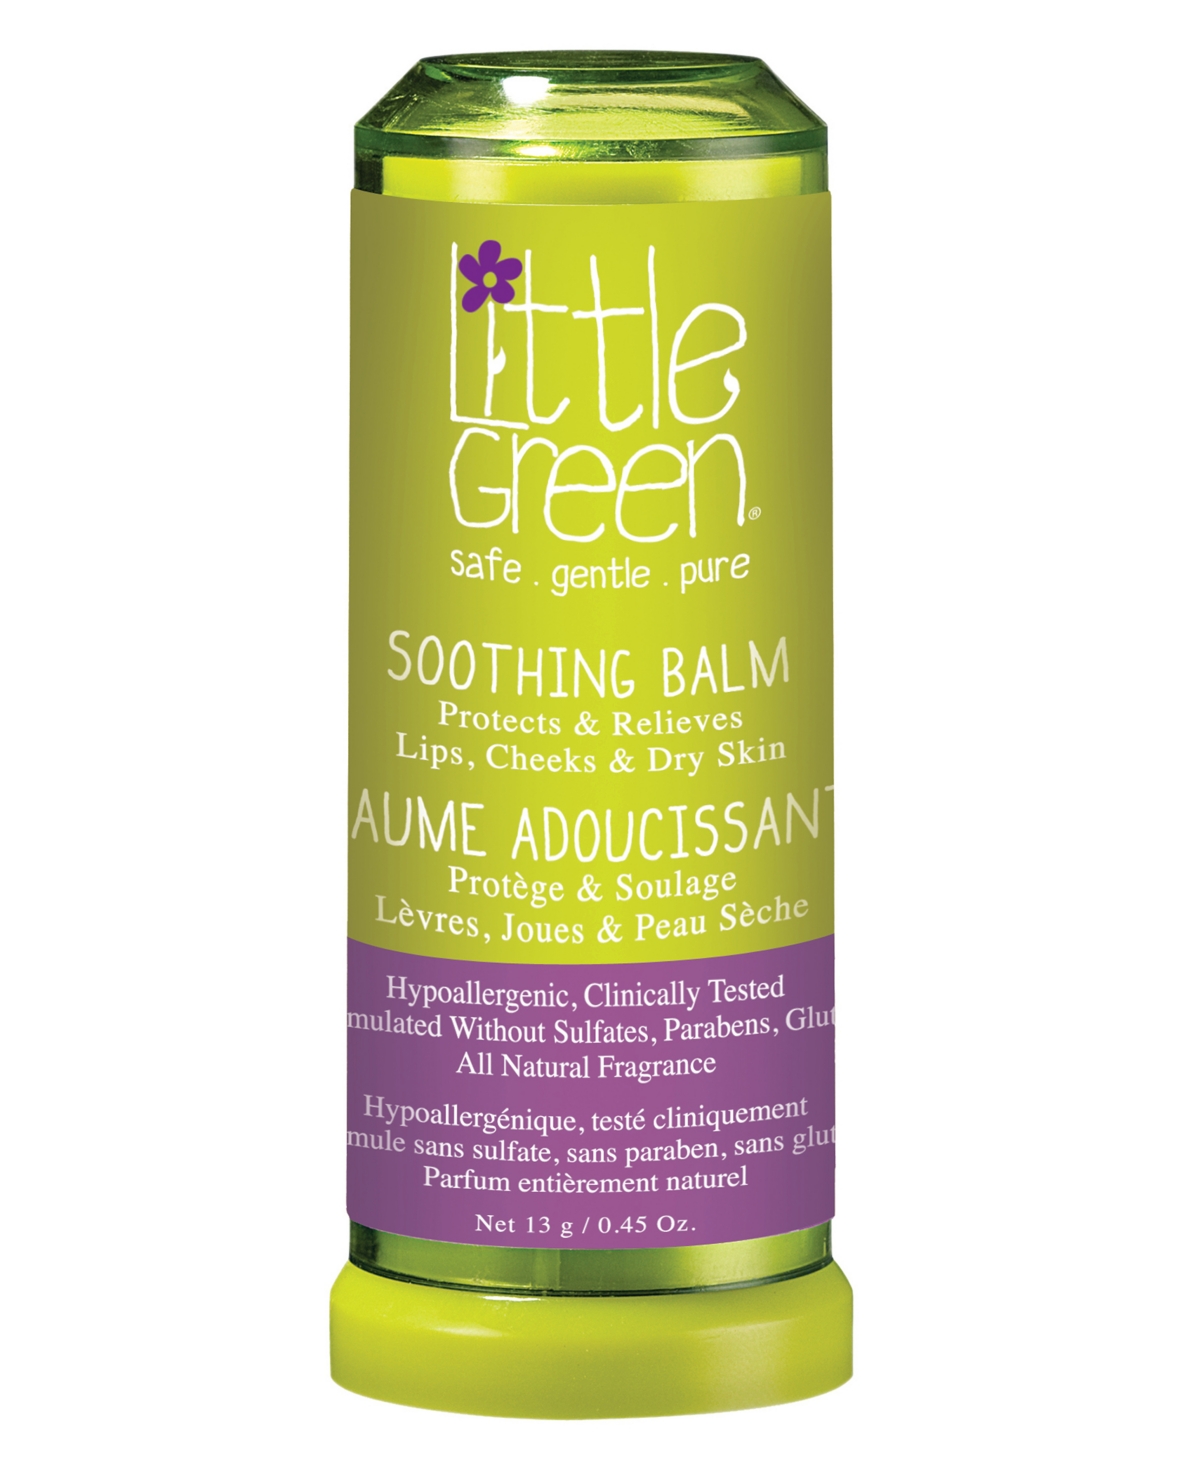 Little Green Soothing Balm, 0.45 oz